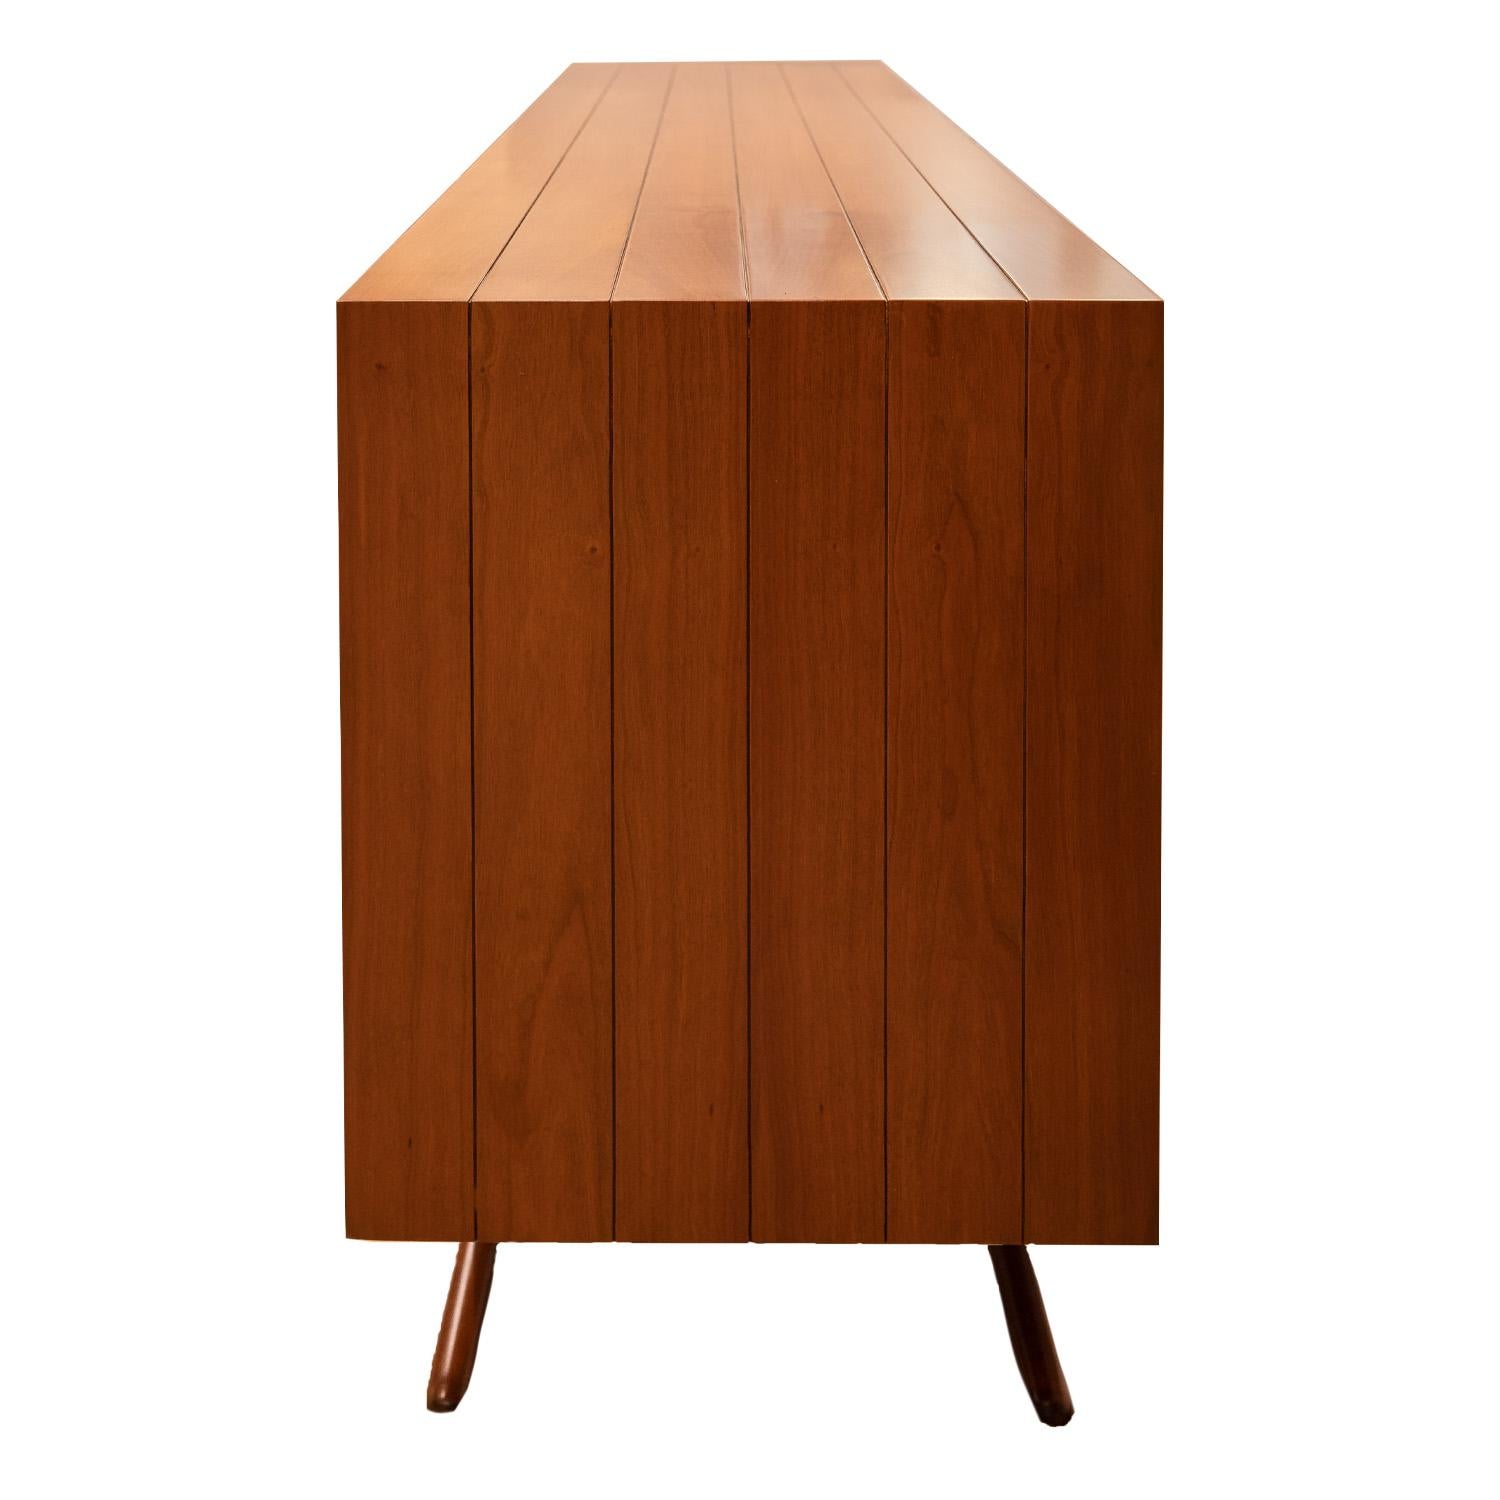 American Vladimir Kagan Rare and Iconic Large Chest of Drawers in Walnut, 1950s